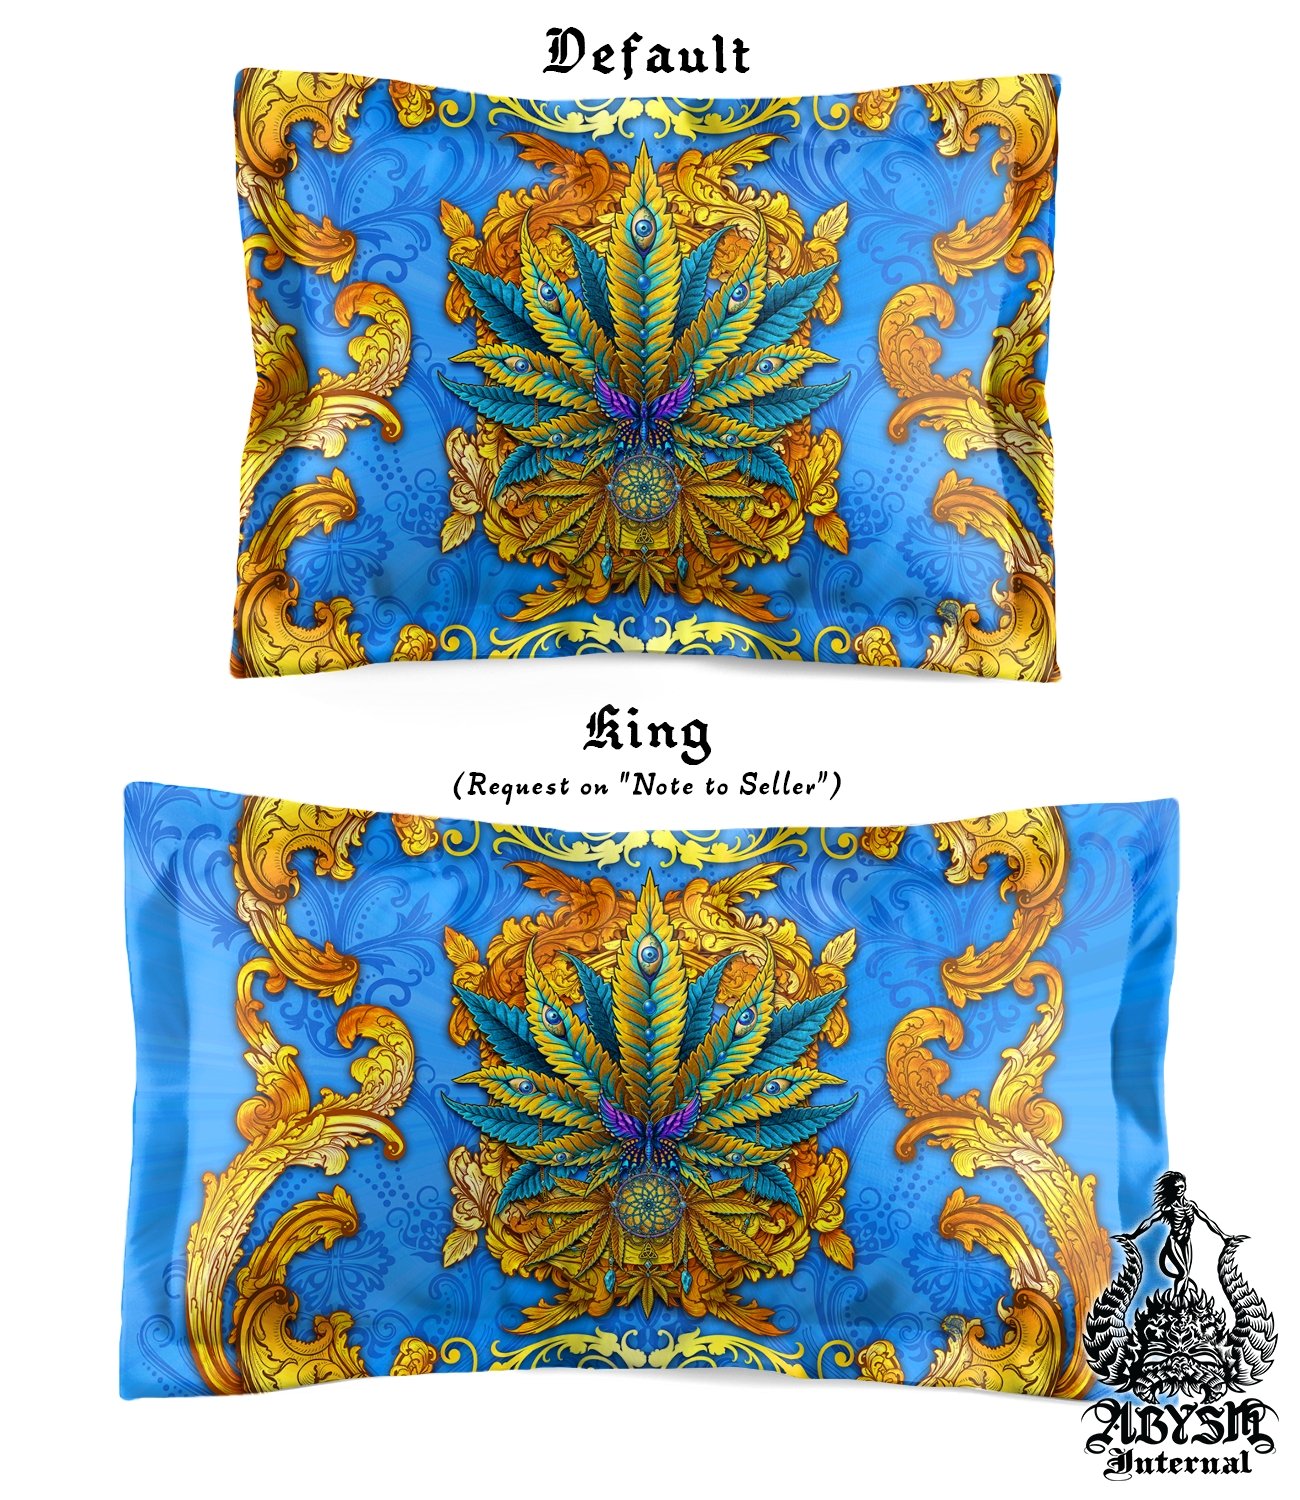 Weed Bedding Set, Comforter and Duvet, Cannabis Bed Cover, Marijuana Bedroom Decor, King, Queen and Twin Size, 420 Room Art - Cyan and Gold - Abysm Internal